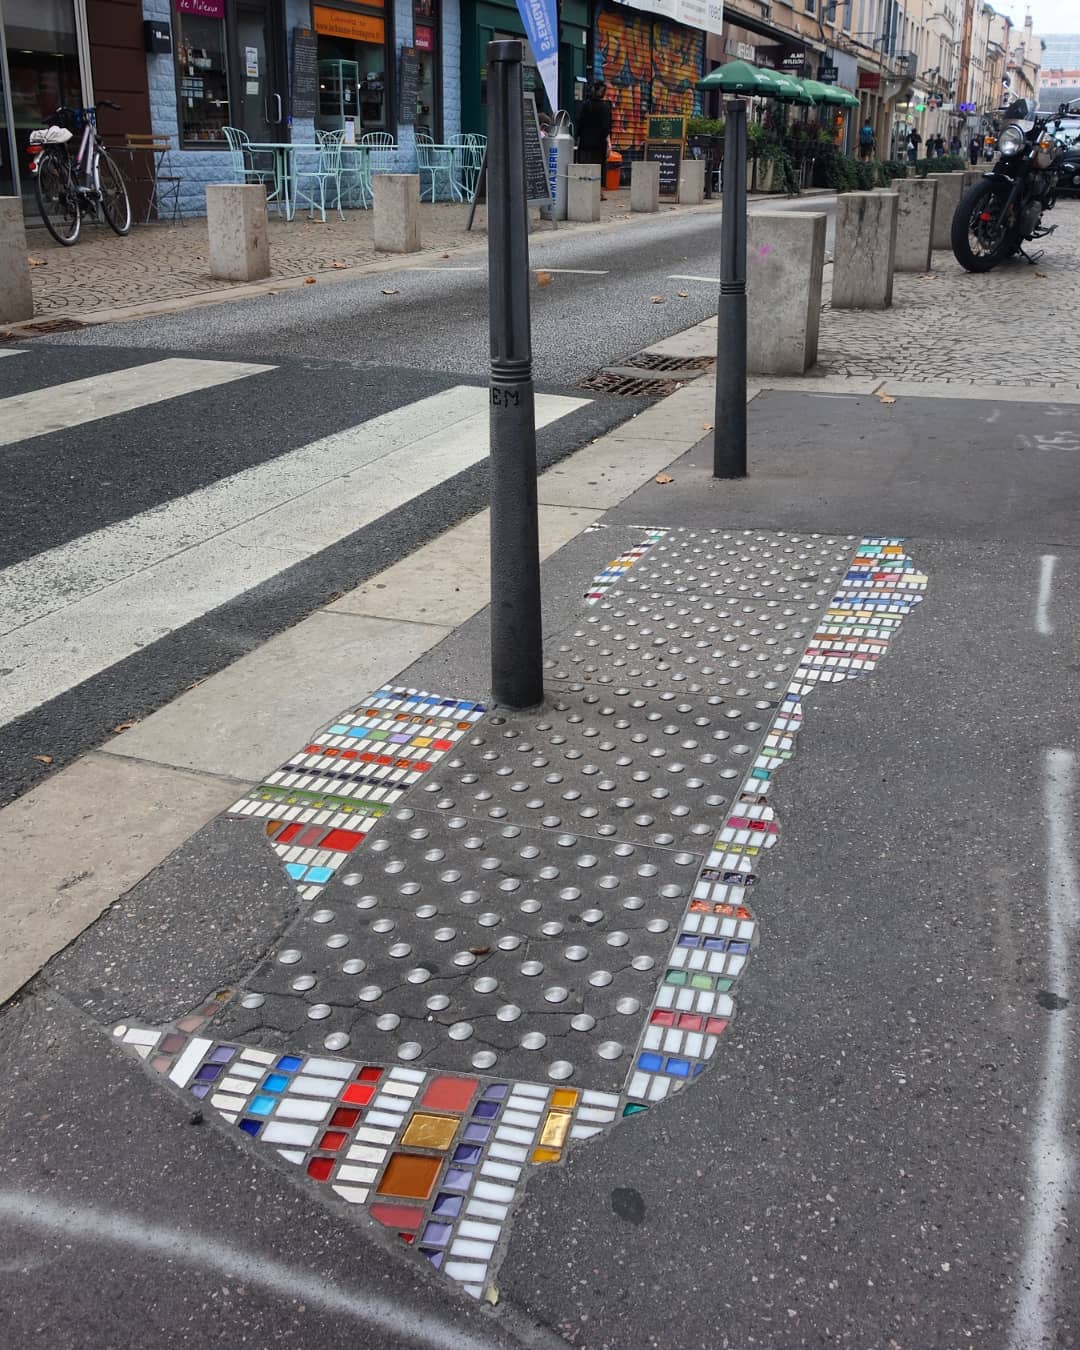 Fractured Sidewalks Pavements And Walls Repaired With Vibrant Tiled Mosaics By Ememem 11